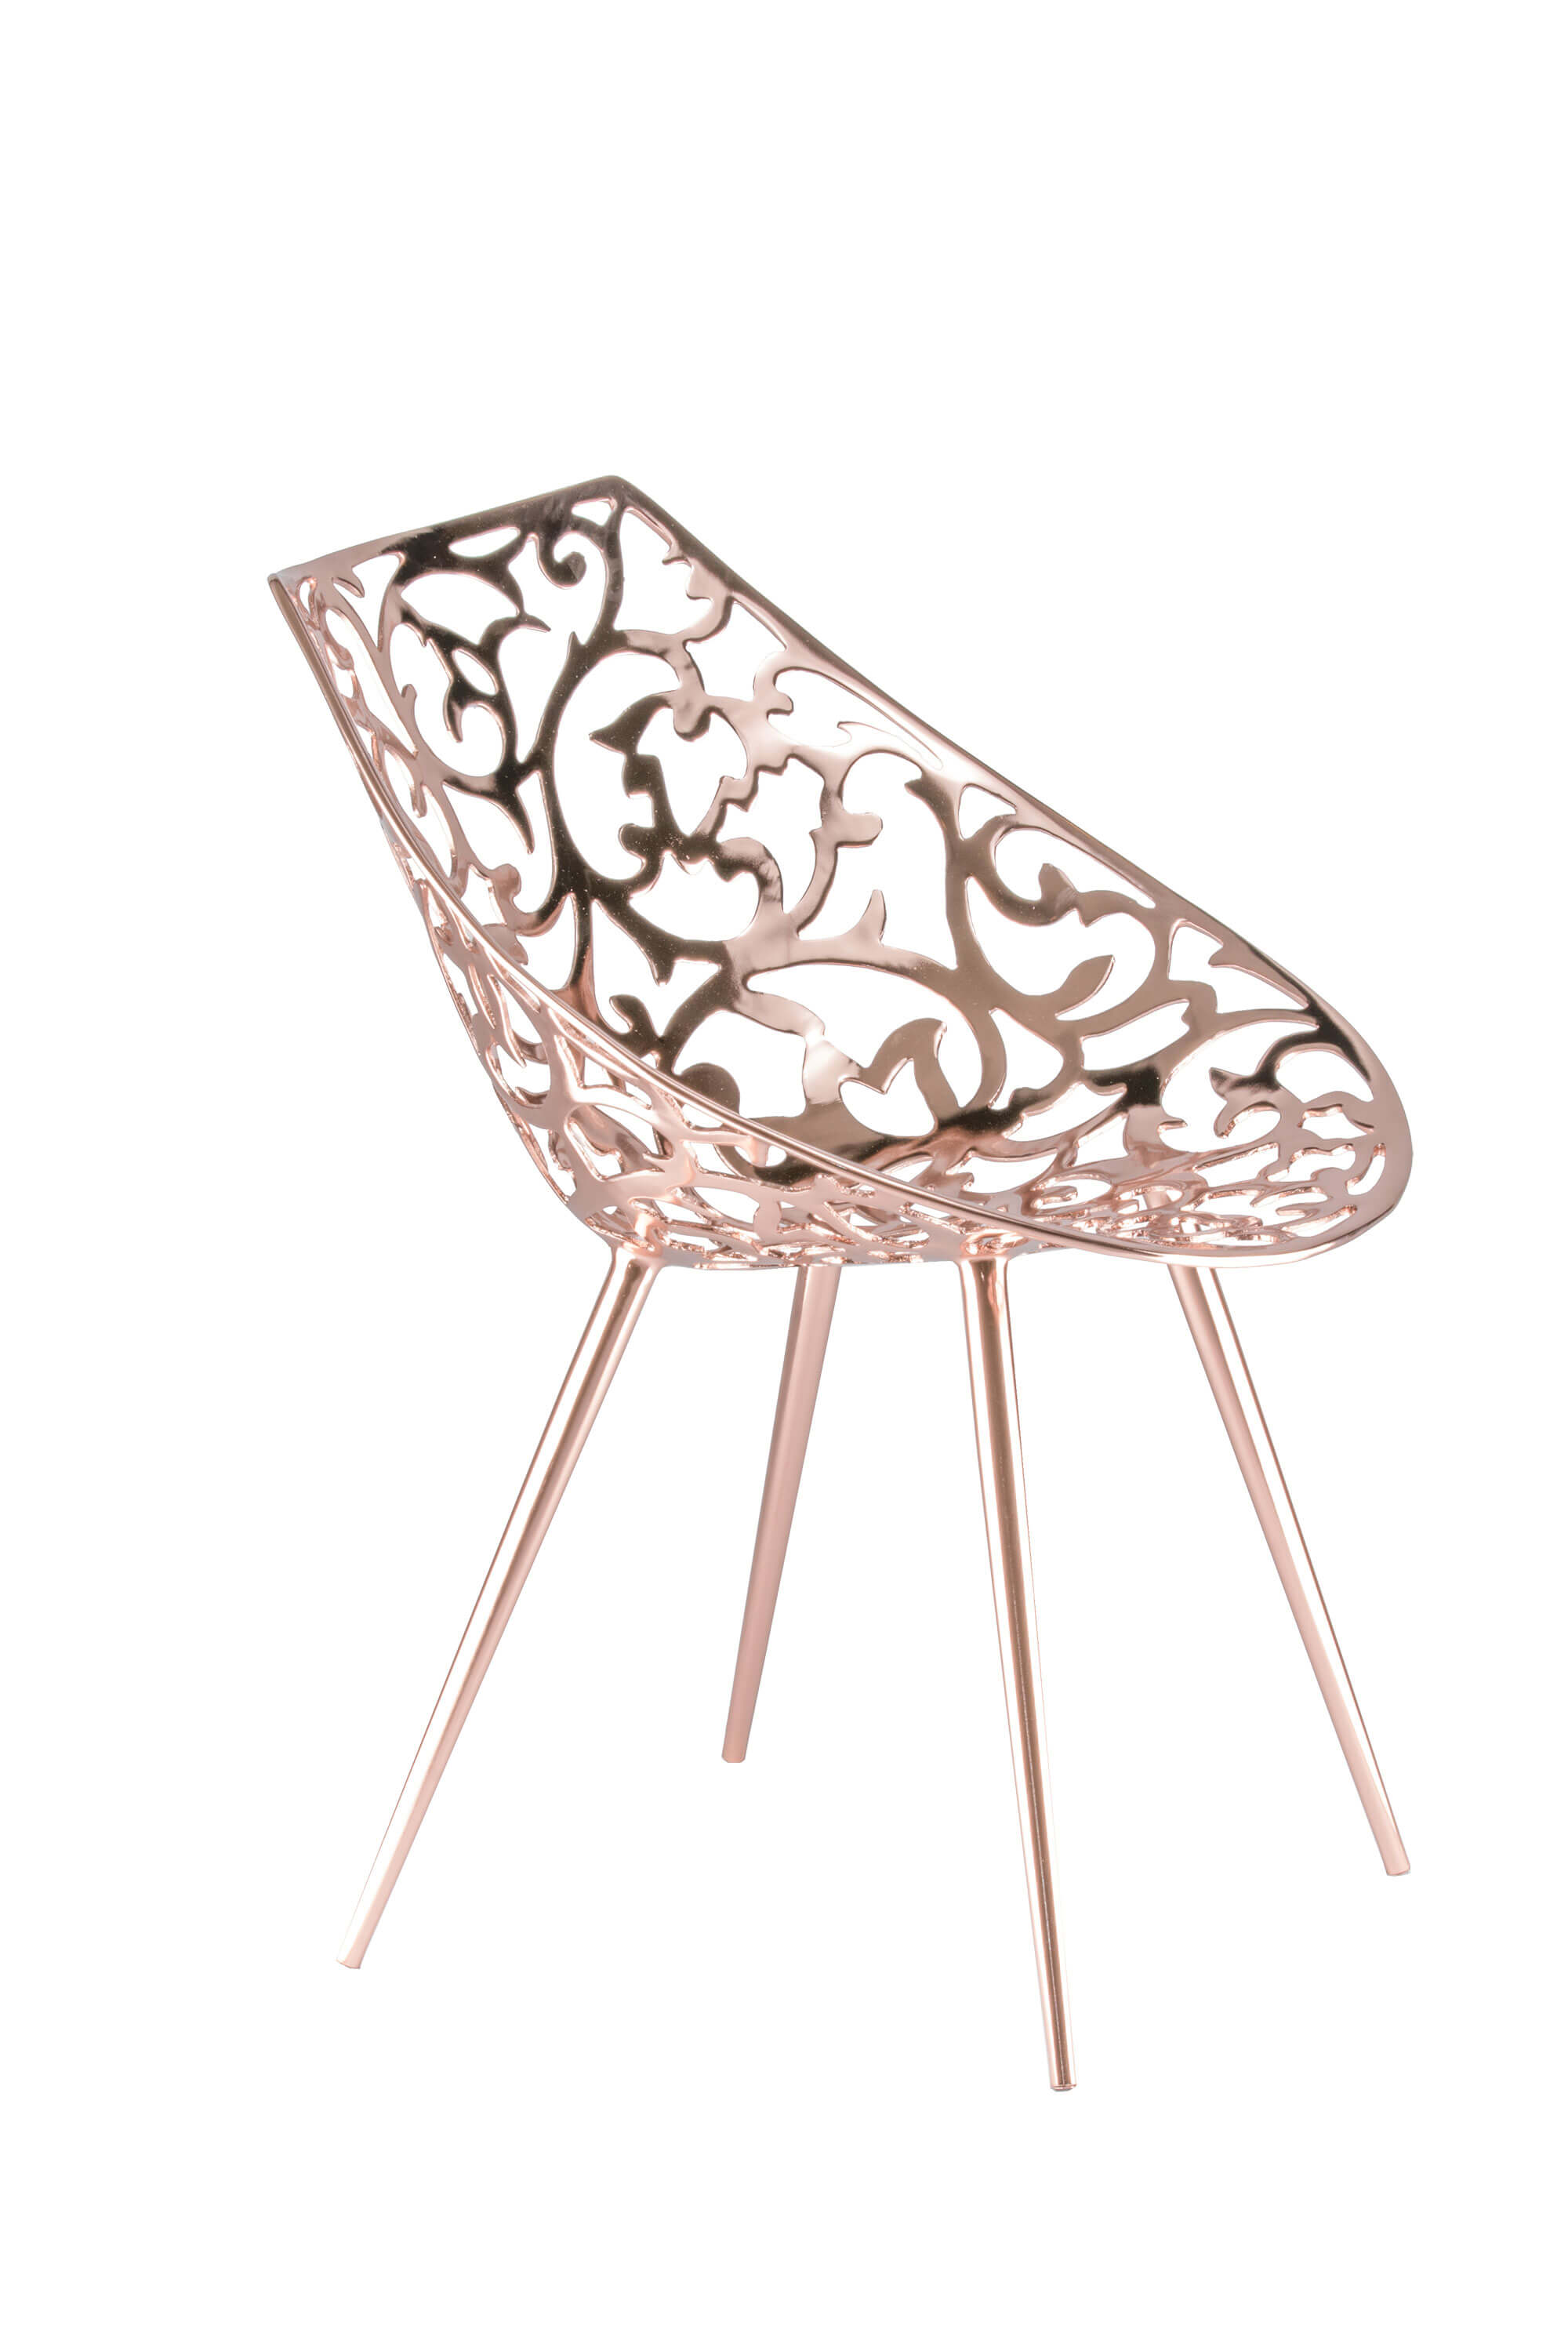 MISS LACY 50TH ANNIVERSARY EDITION (DRIADE) - Chaises